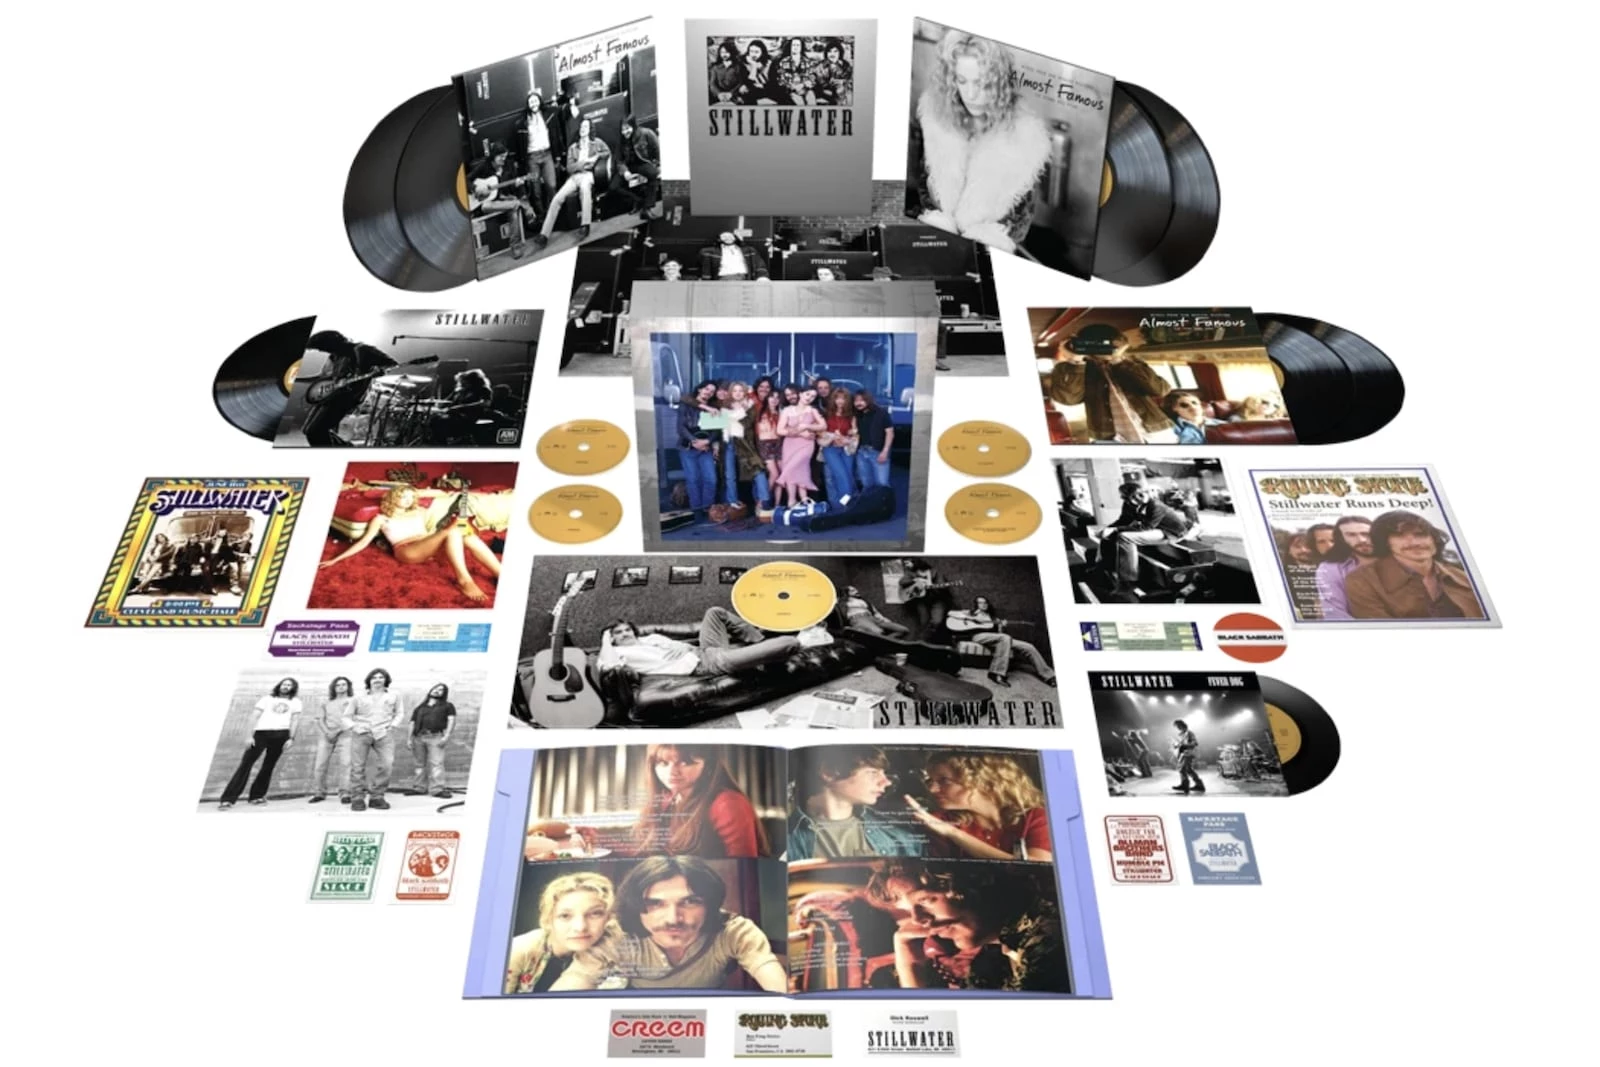 Almost Famous Soundtrack Gets Uber Deluxe Expanded Box Set